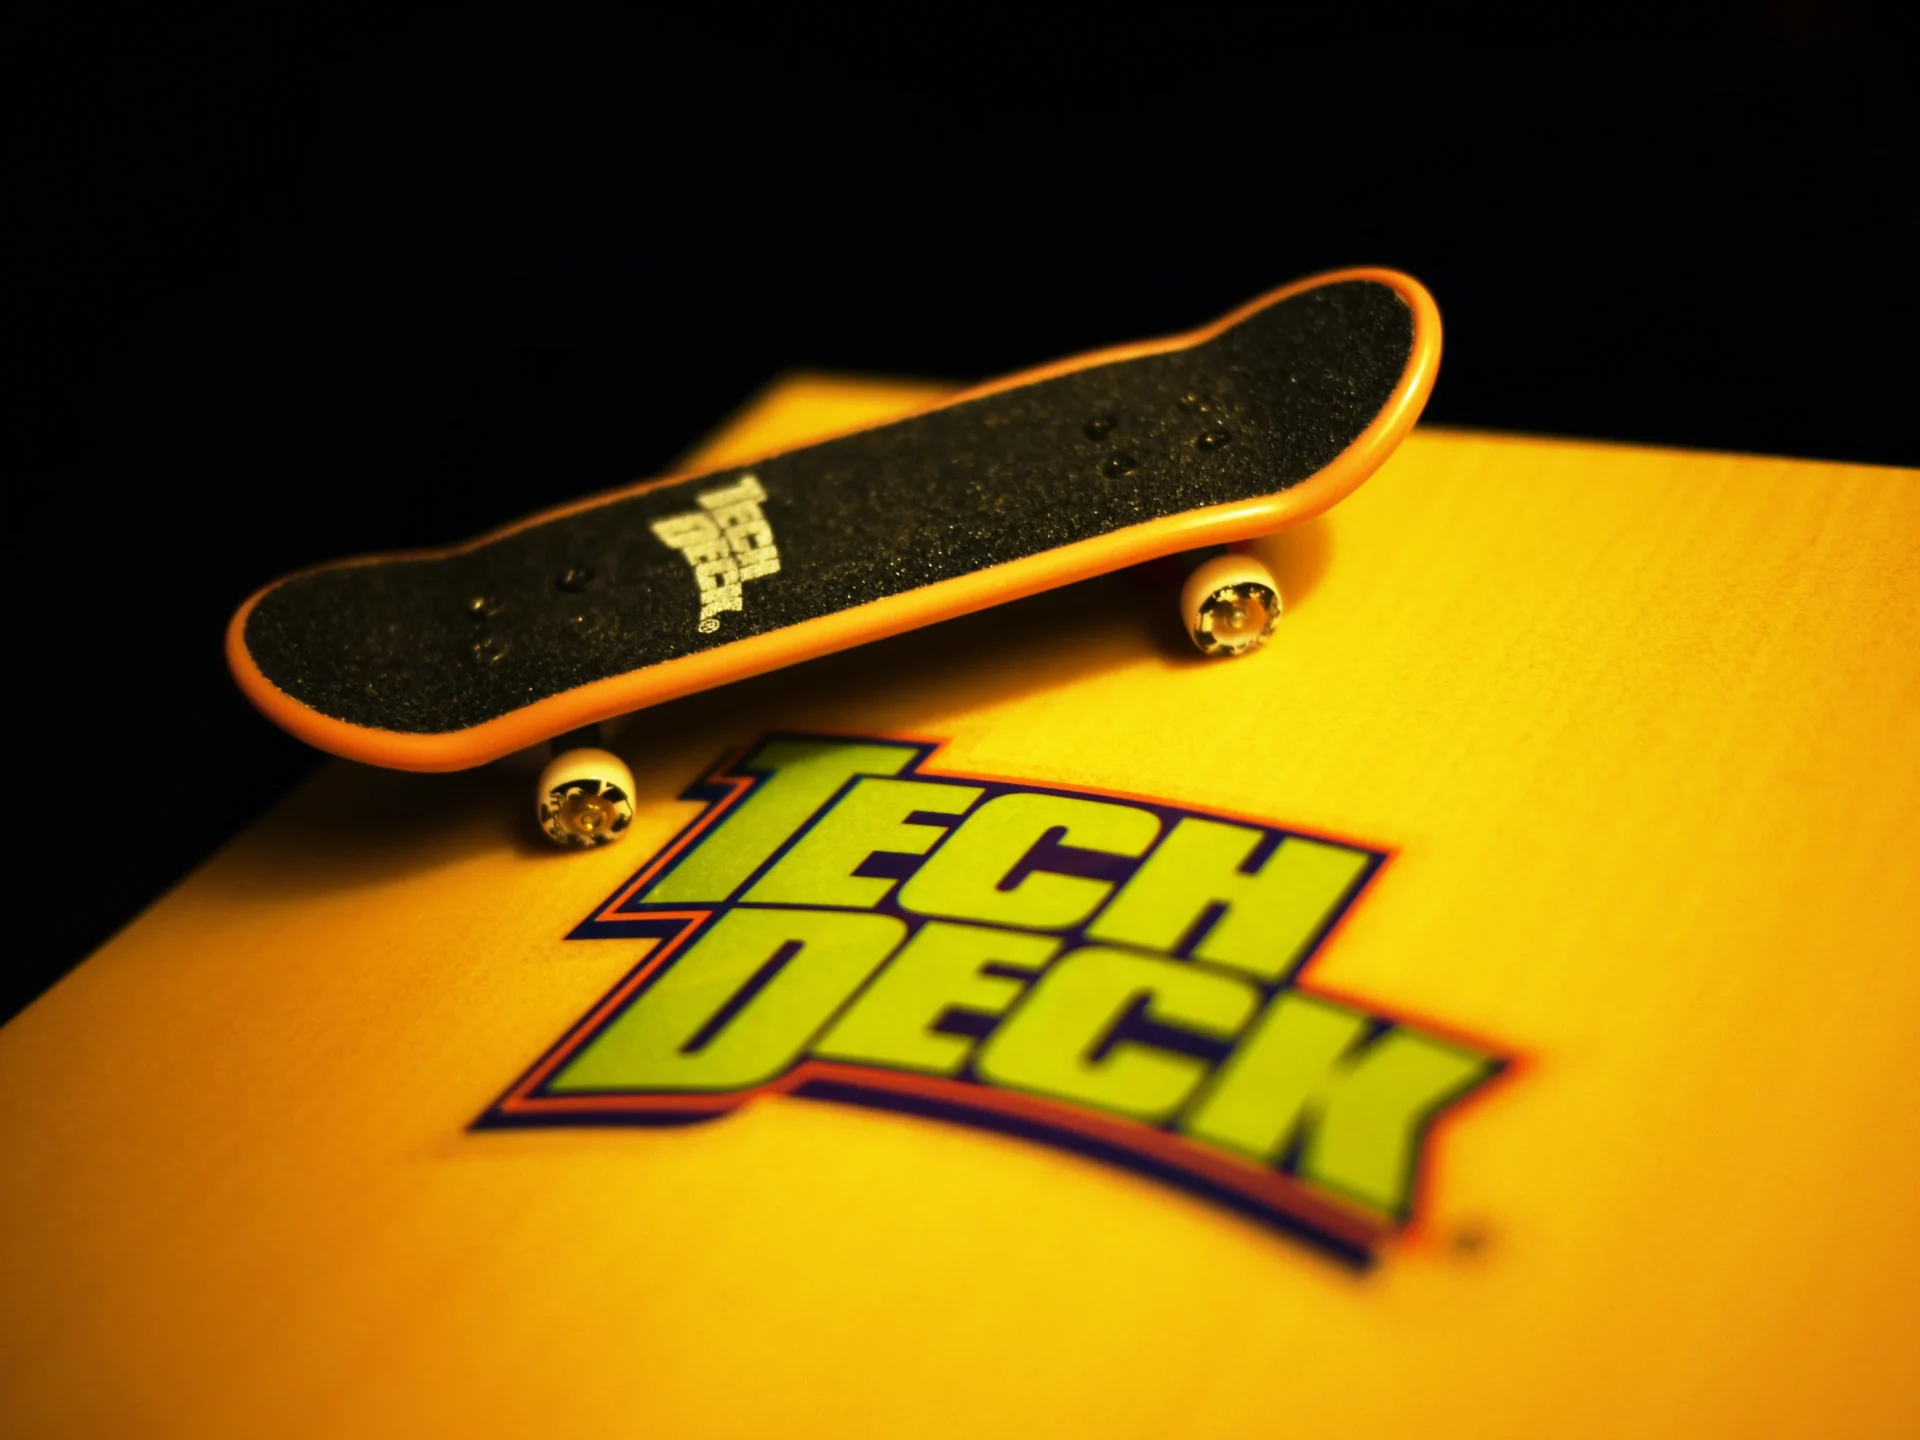 The Fascinating World of Tech Decks: A Skatepark at Your Fingertips